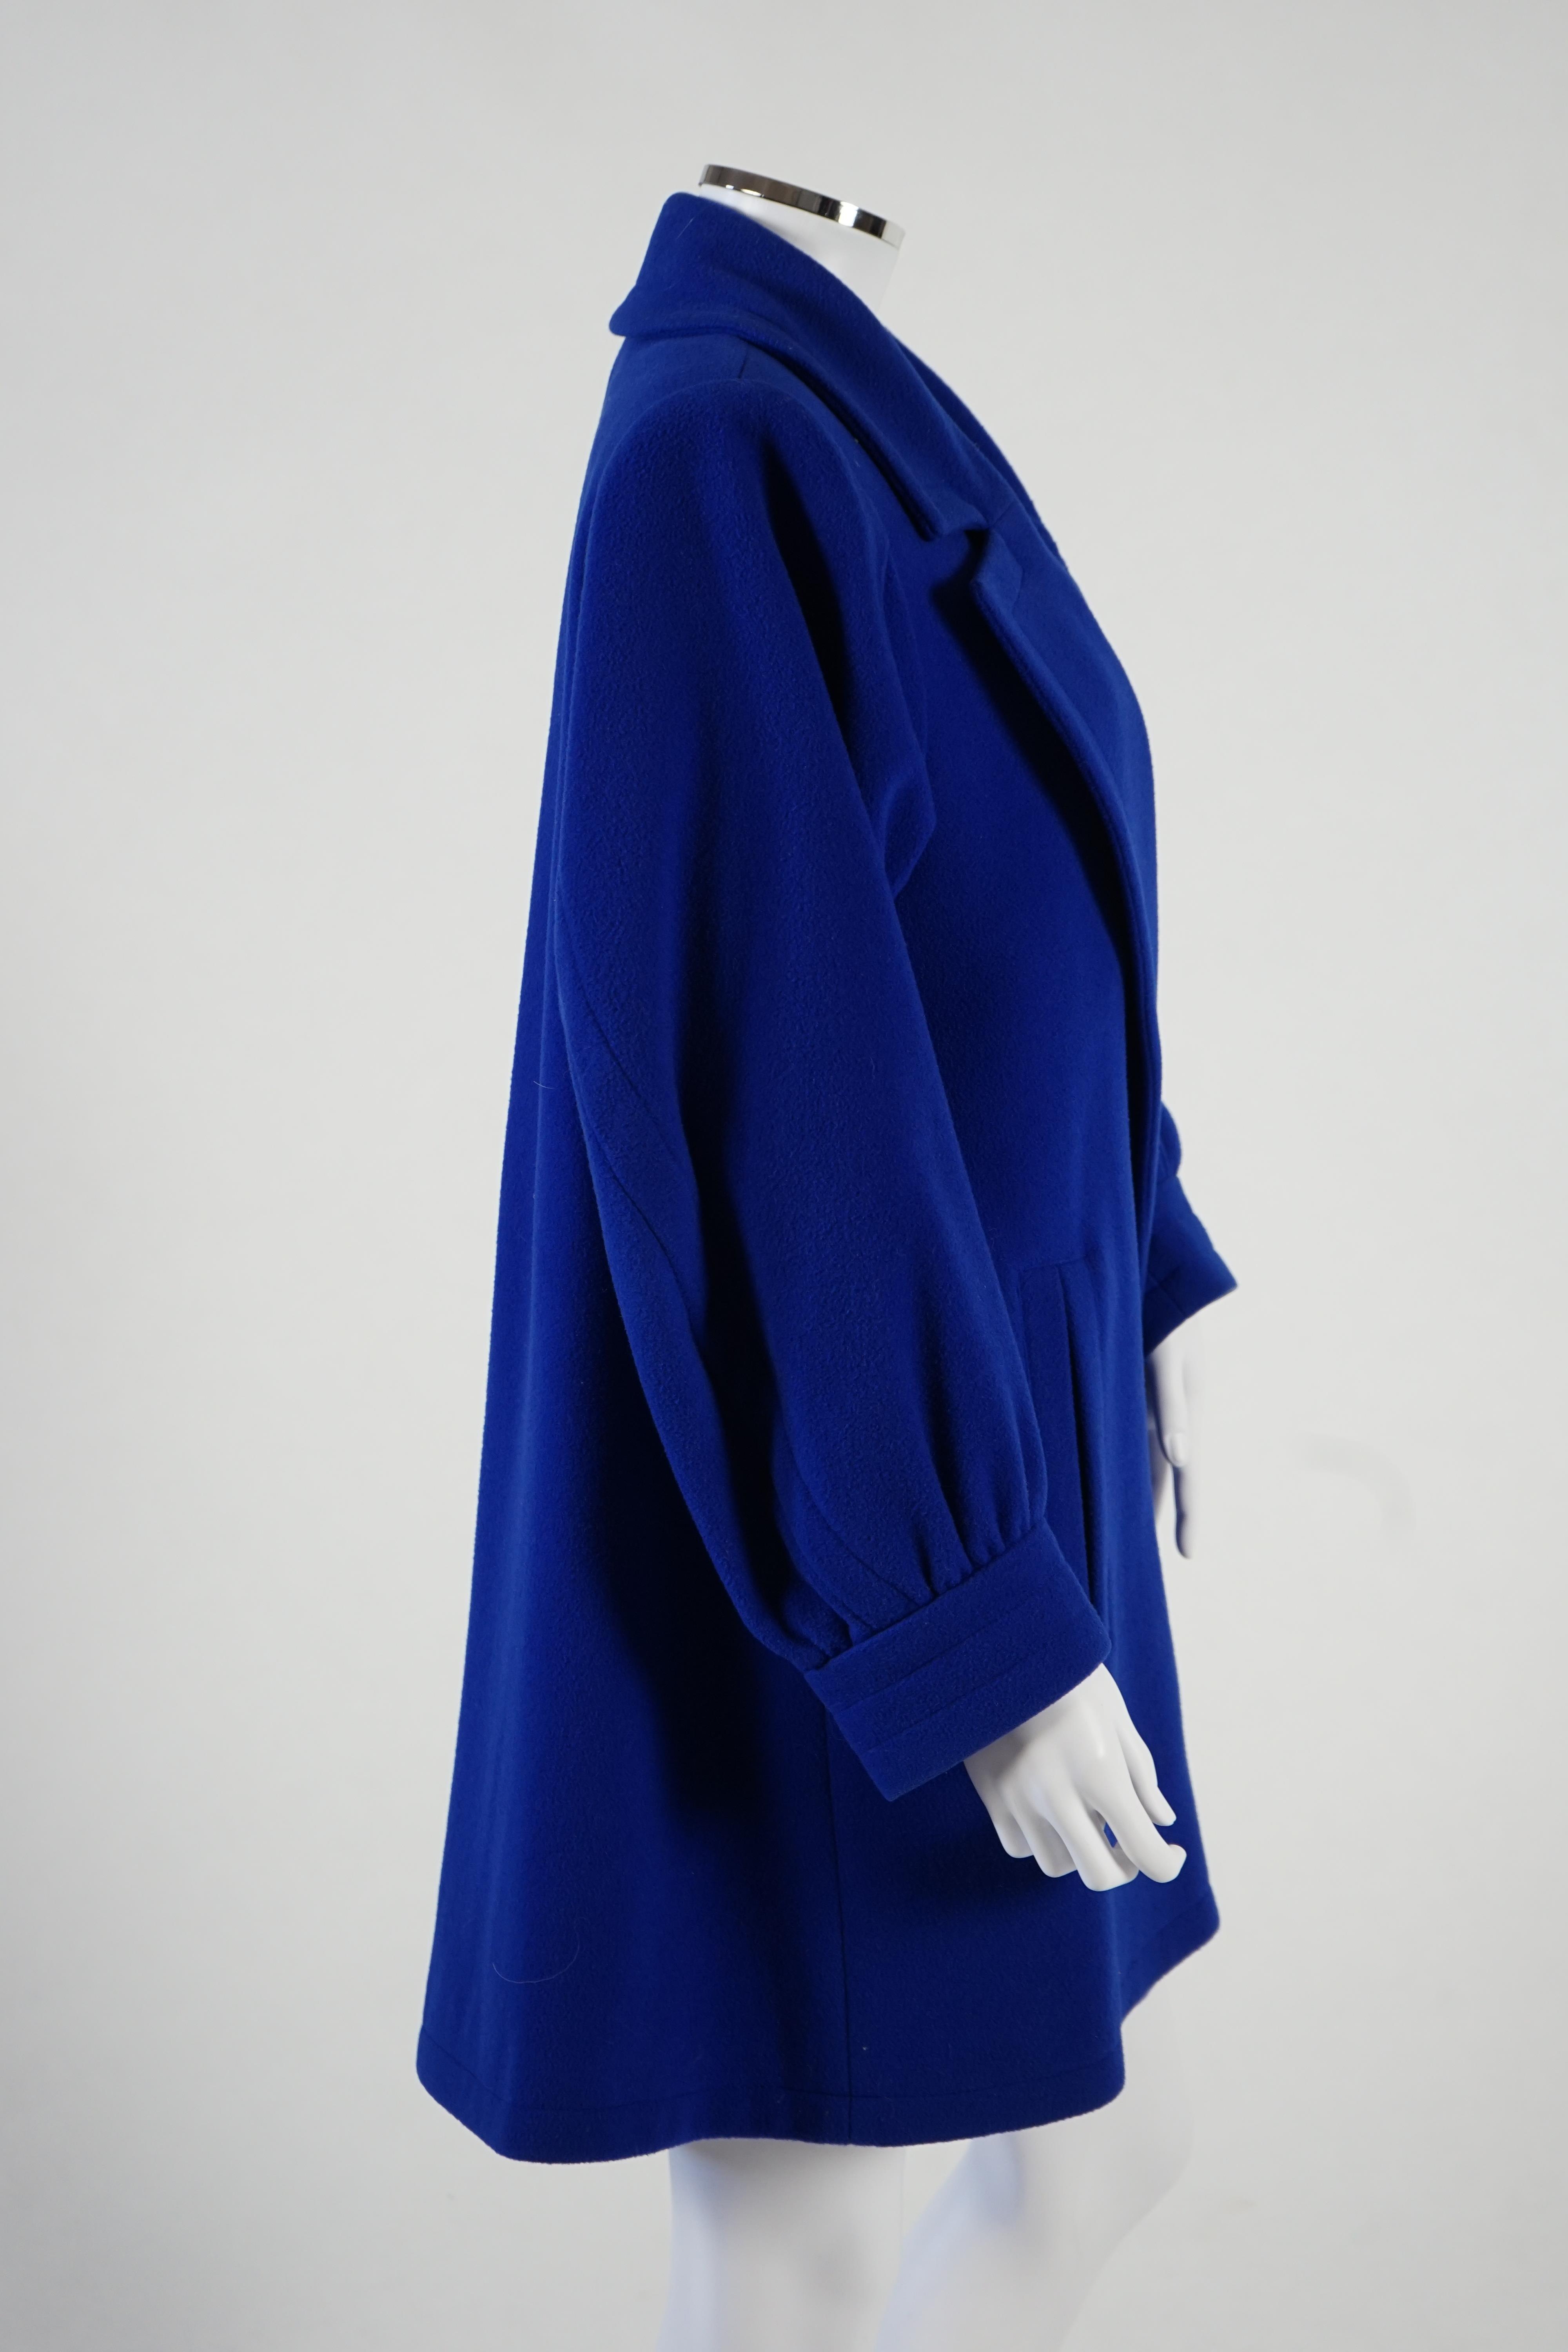 A vintage Yves Saint Laurent variation lady's royal blue wool coat, F 38 (UK 10). Proceeds to Happy Paws Puppy Rescue